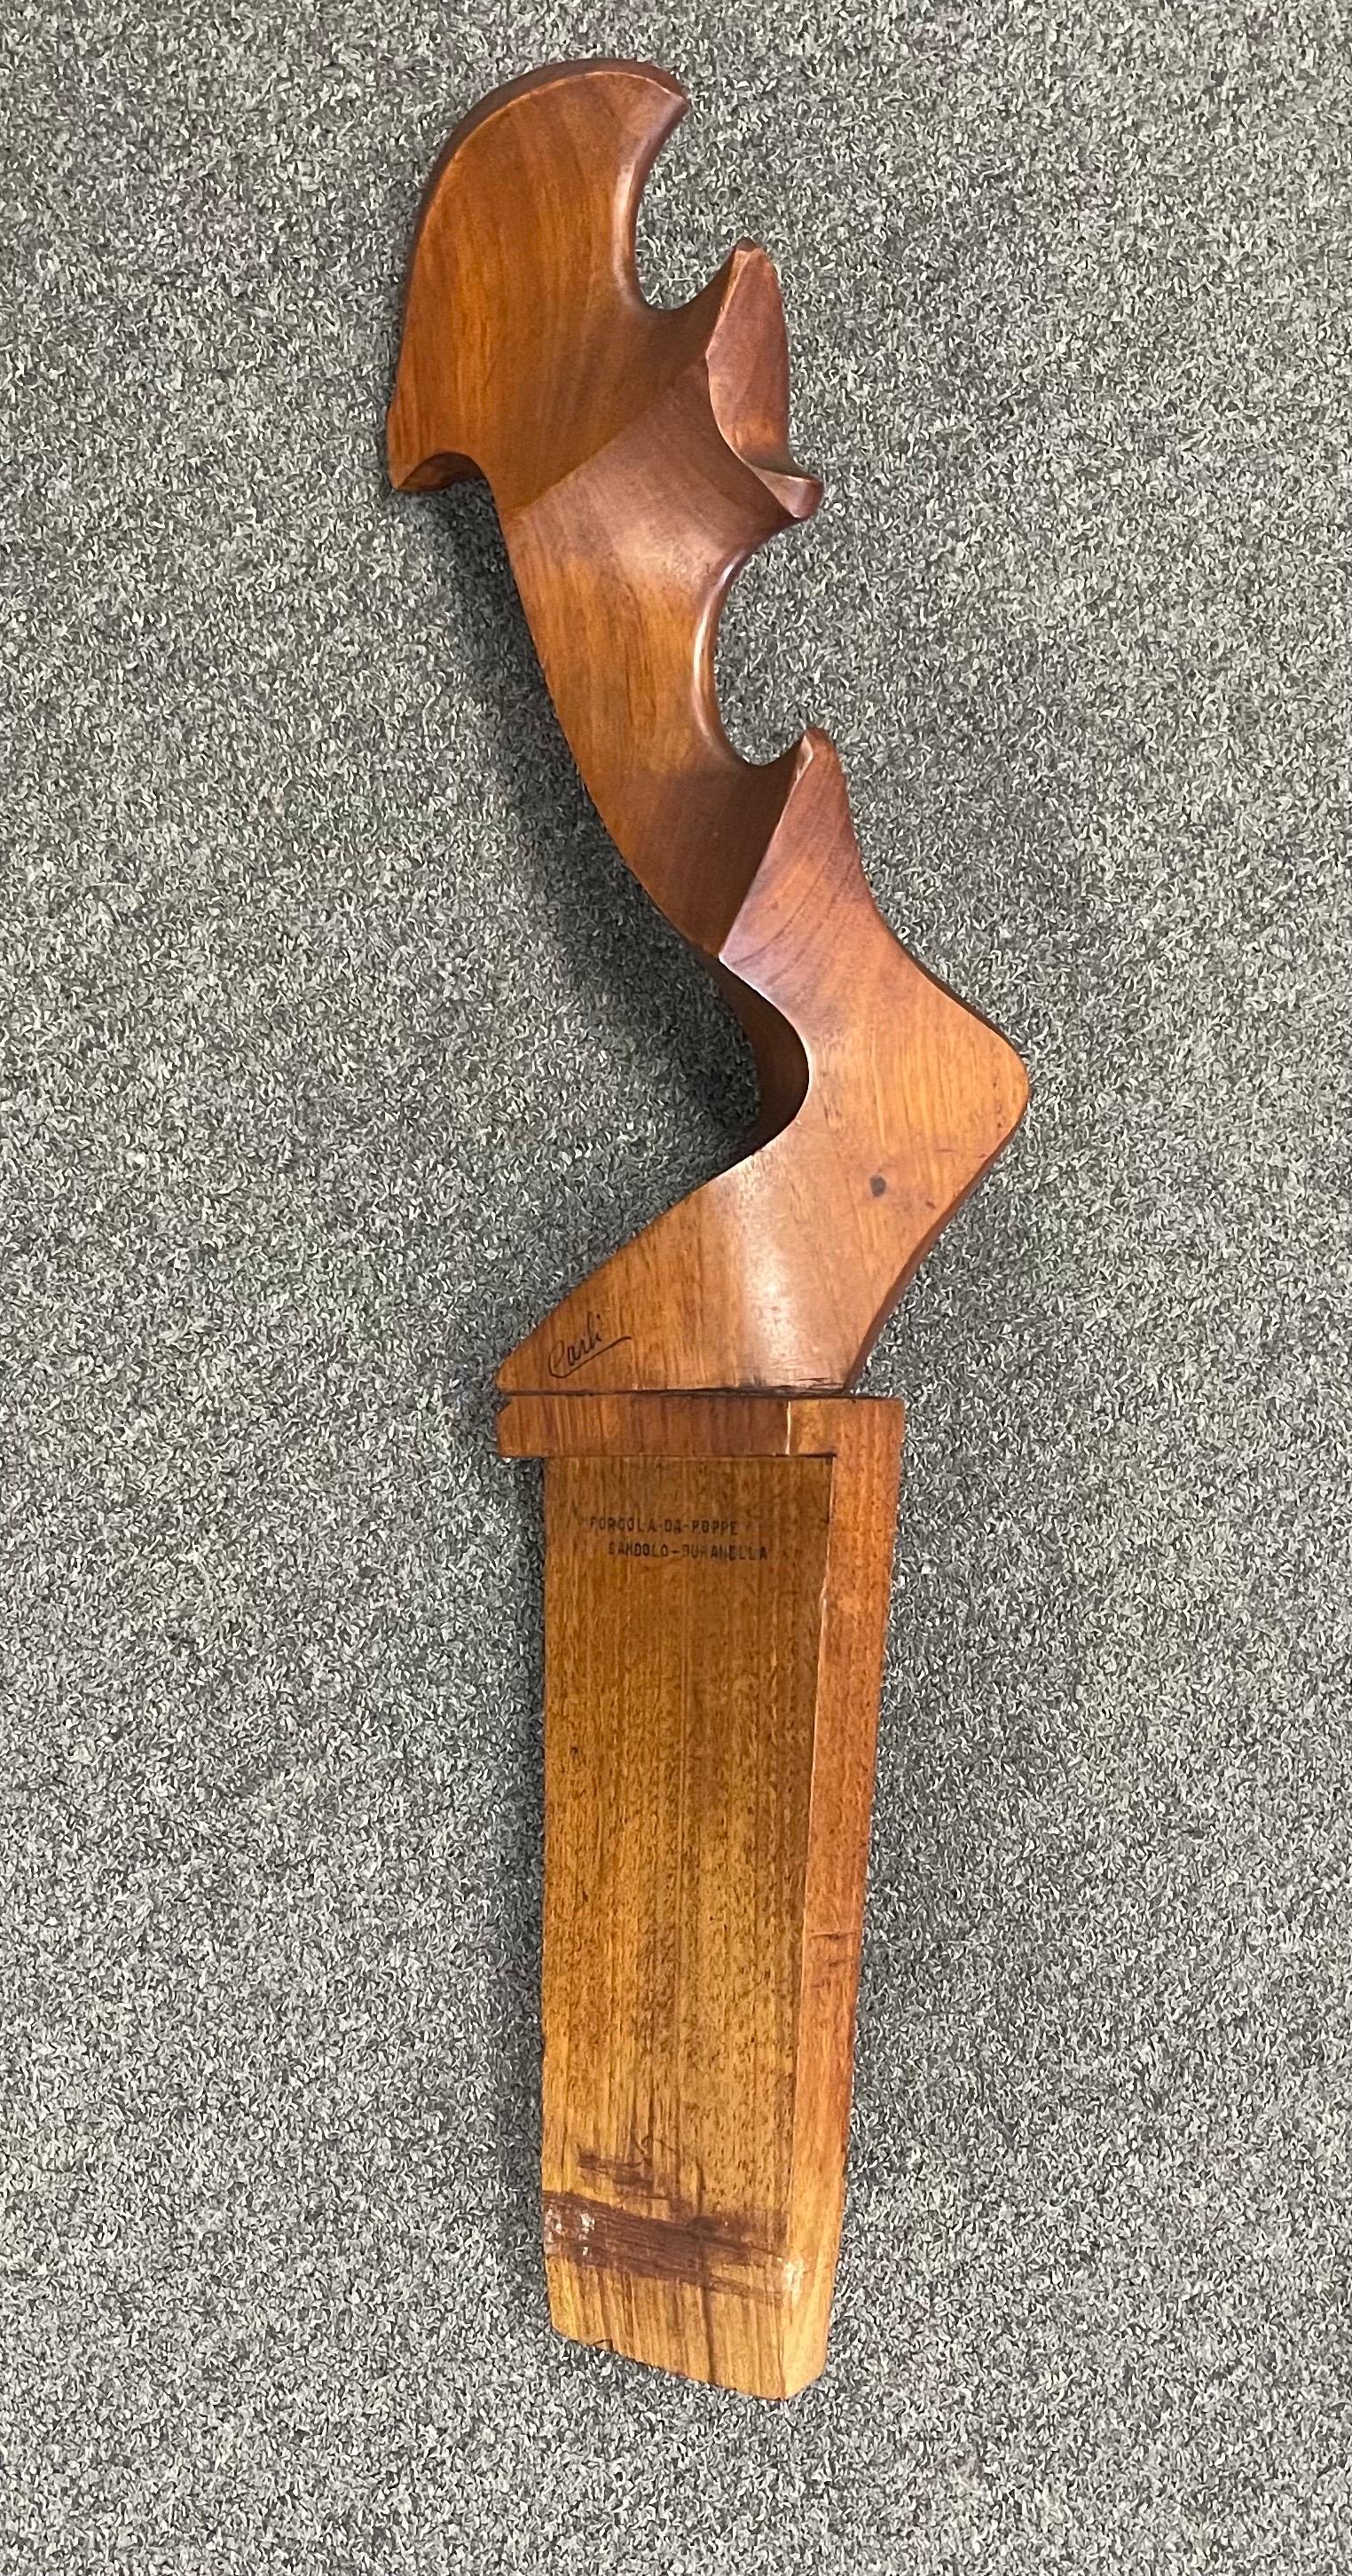 Venetian Abstract Solid Walnut Forcola Sculpture by Giuseppe Carli For Sale 4